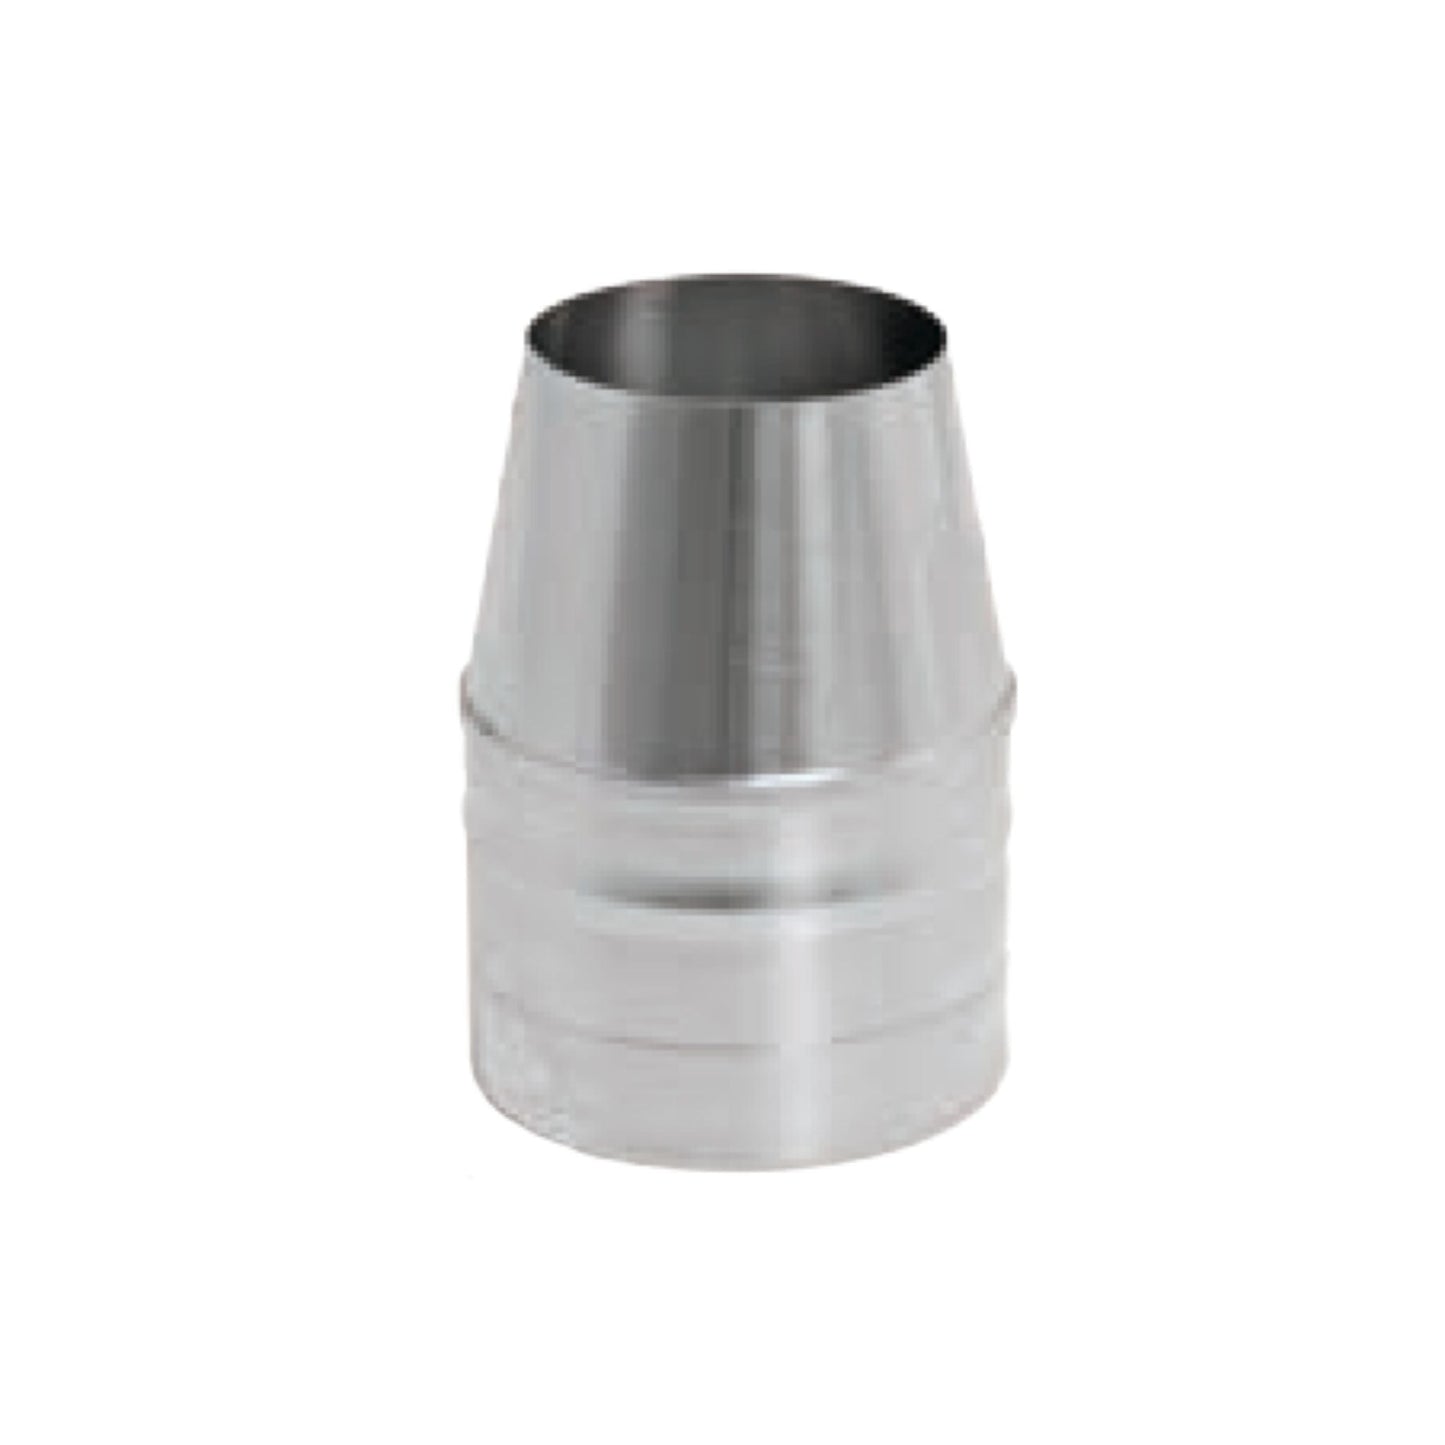 DuraVent FasNSeal 12" x 11" 29-4C Stainless Steel Termination Cone